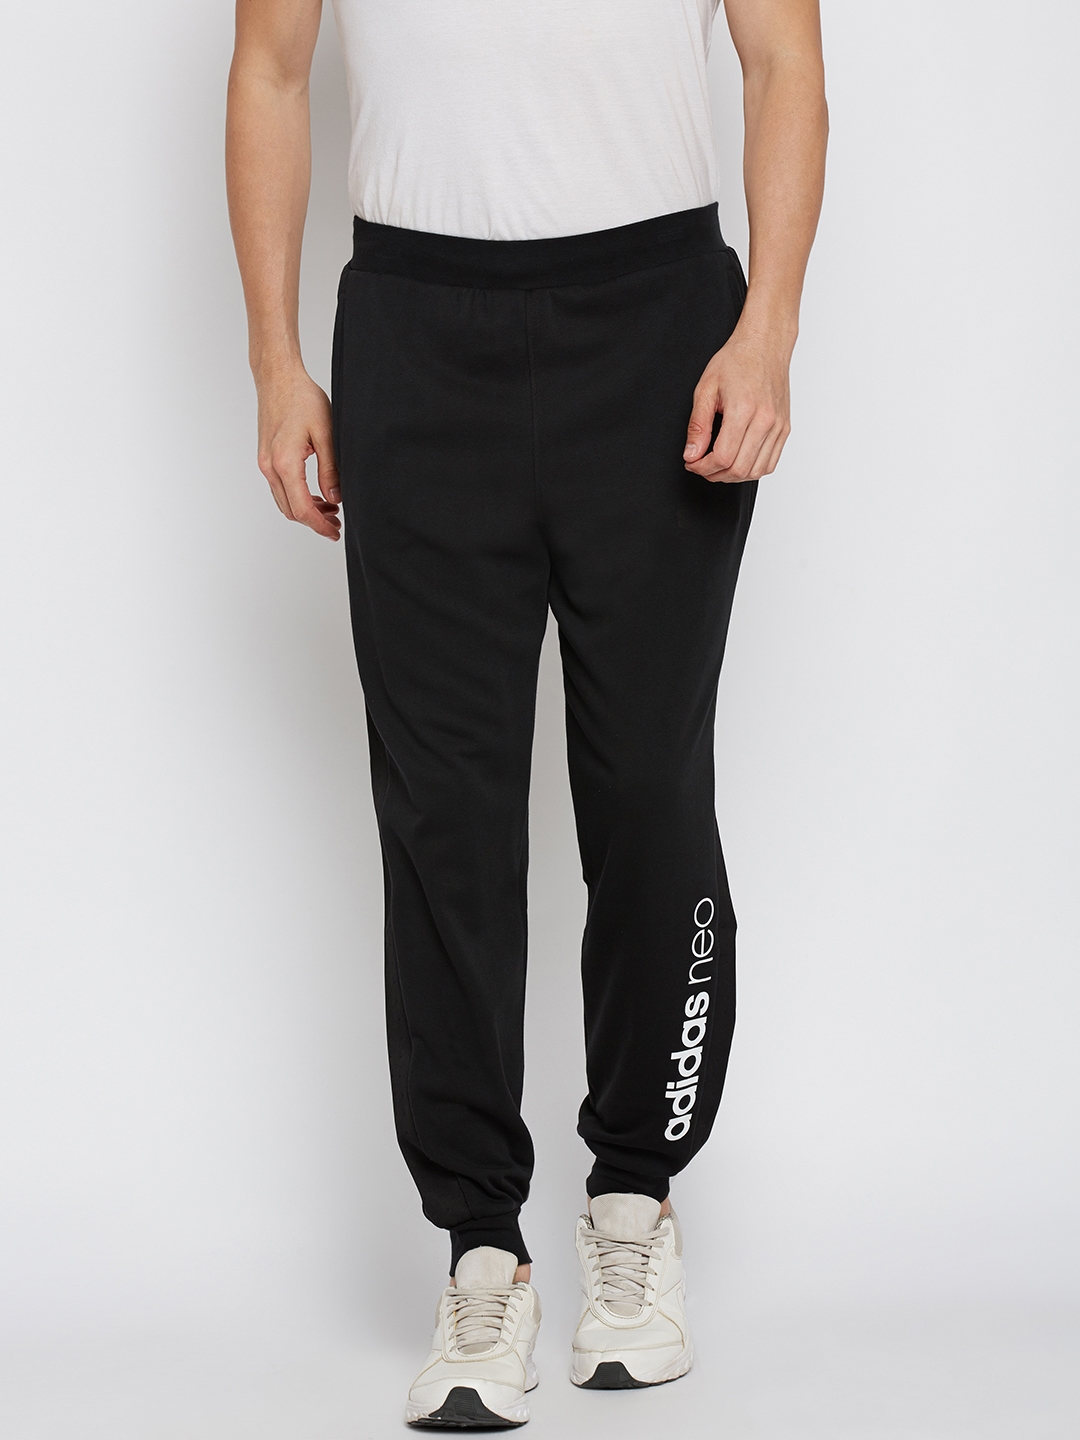 adidas Joggers outlet - Men - 1800 products on sale | FASHIOLA.co.uk